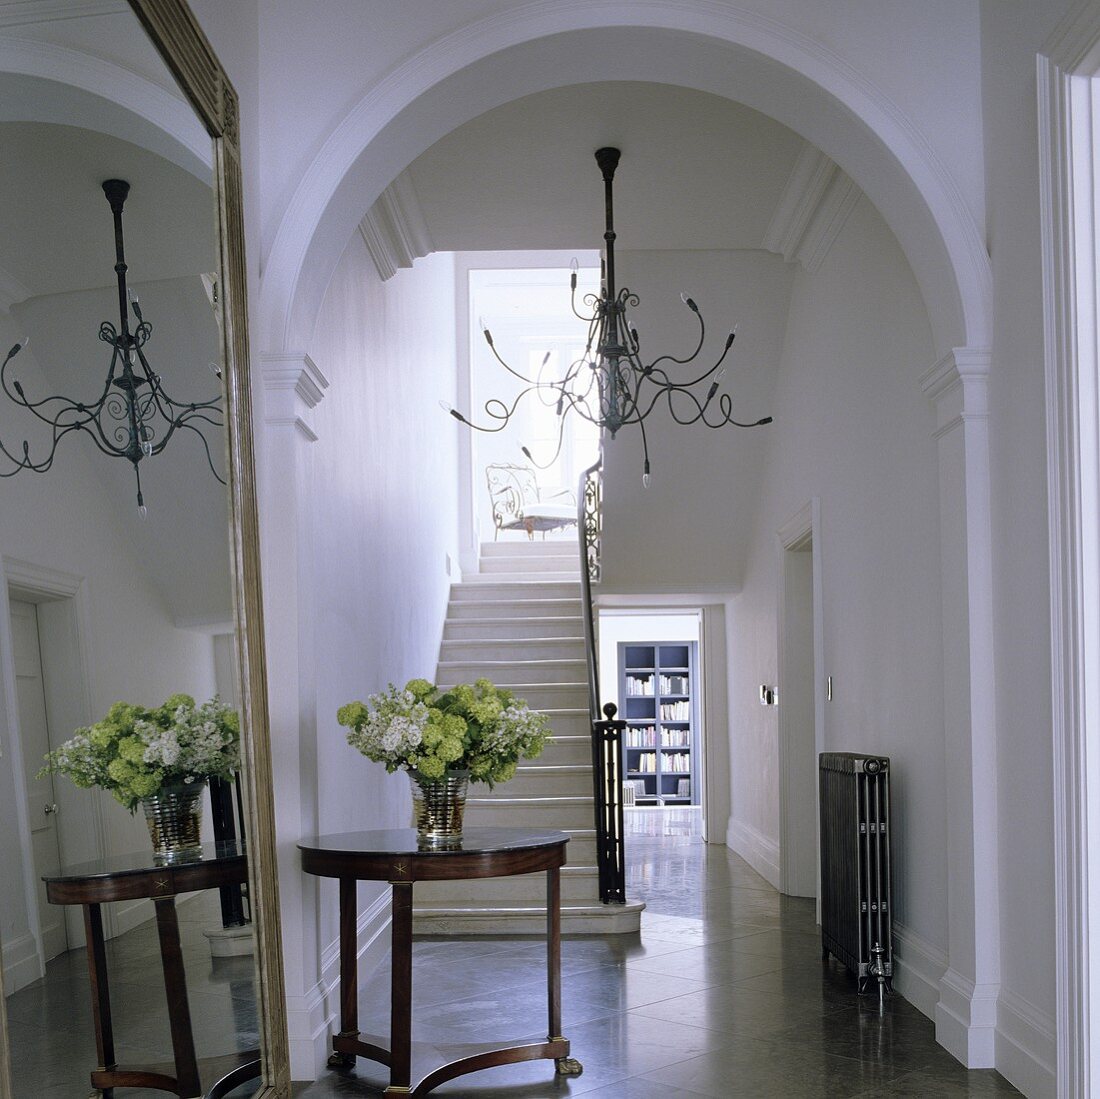 An arched doorway in an elegant hallway with a view of a stairway, an antique side table and a chandelier with Medusa-like arms